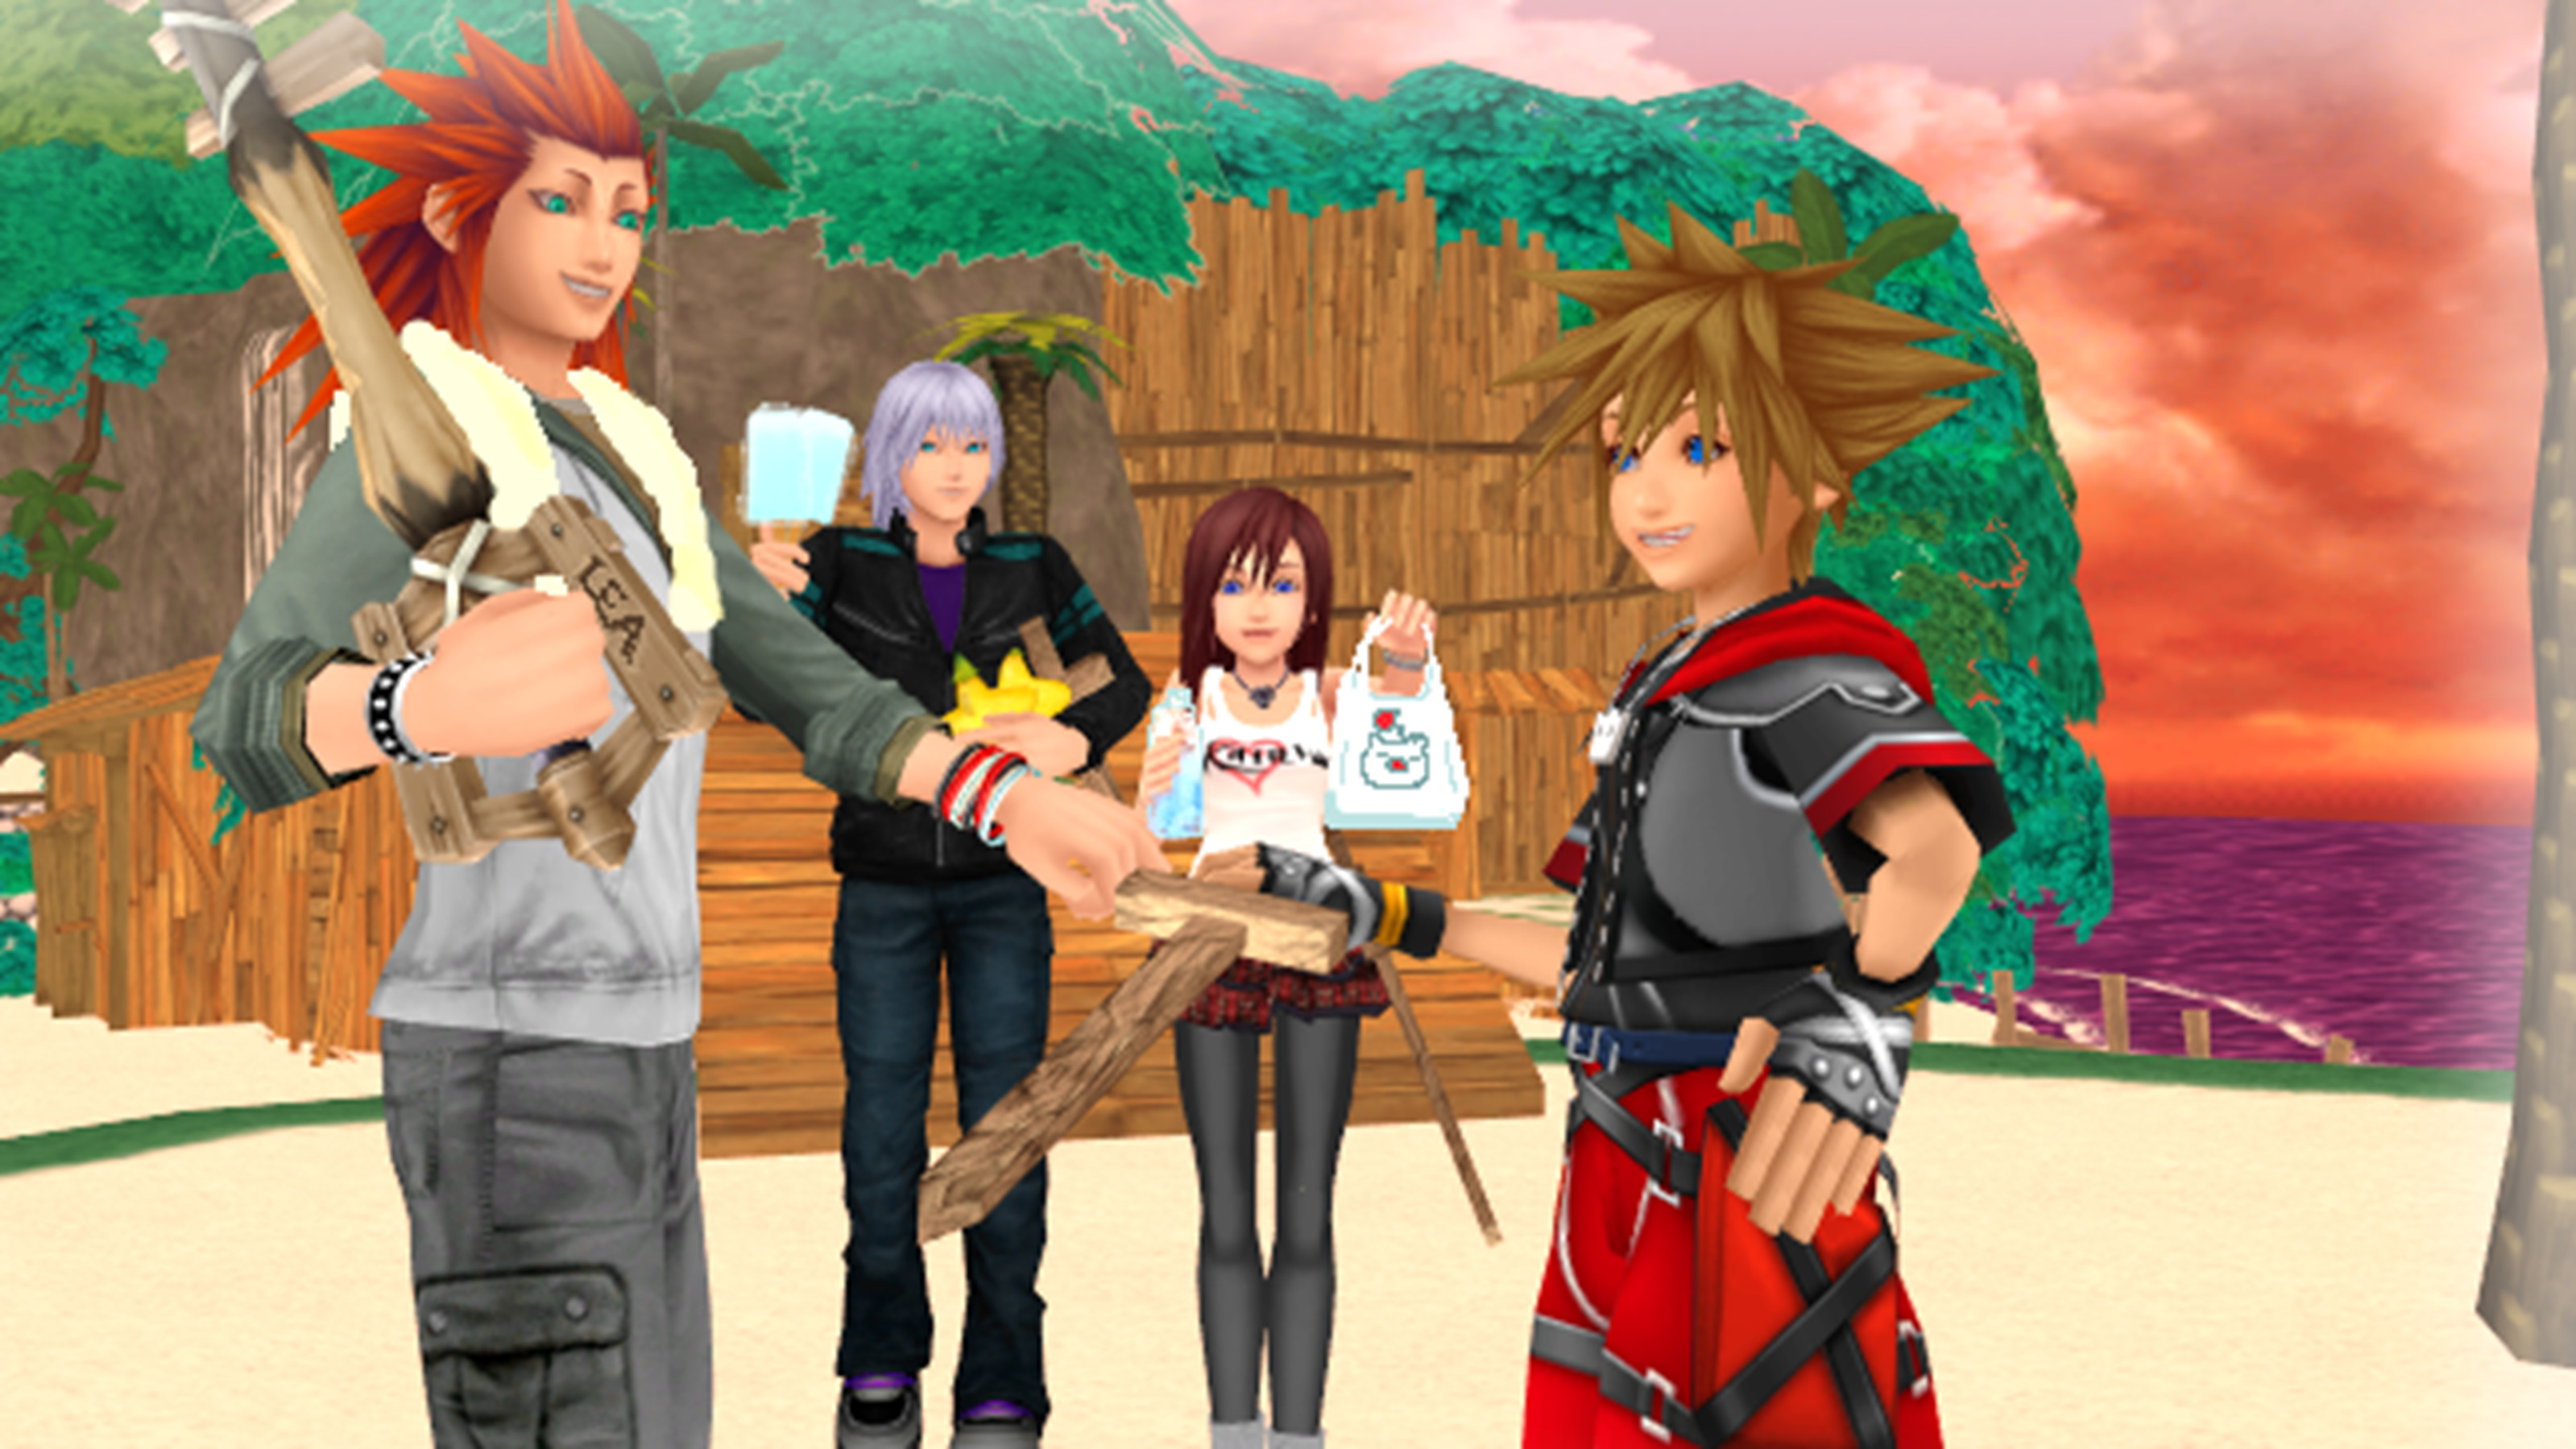 Kingdom Hearts trios images Sora and Lea Practing Keyblade Training with Riku and Kairi. HD wallpaper and background photos